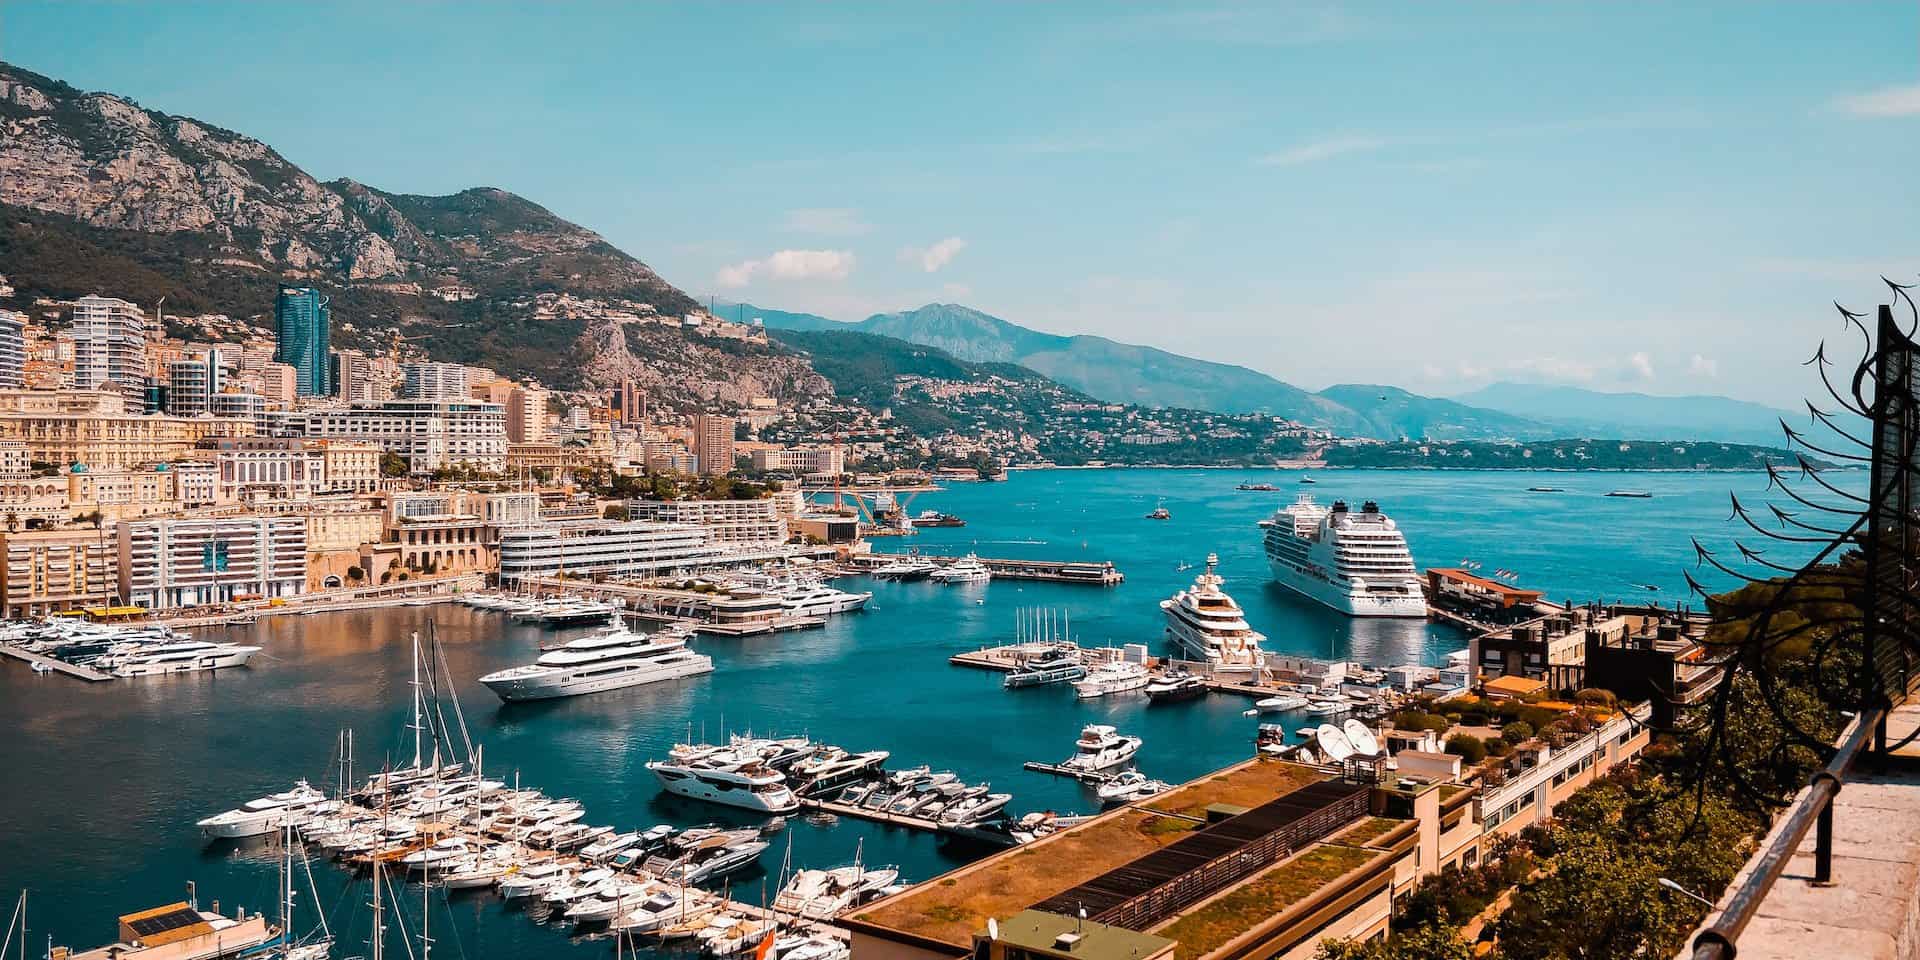 What to visit during Your Stay in Monaco